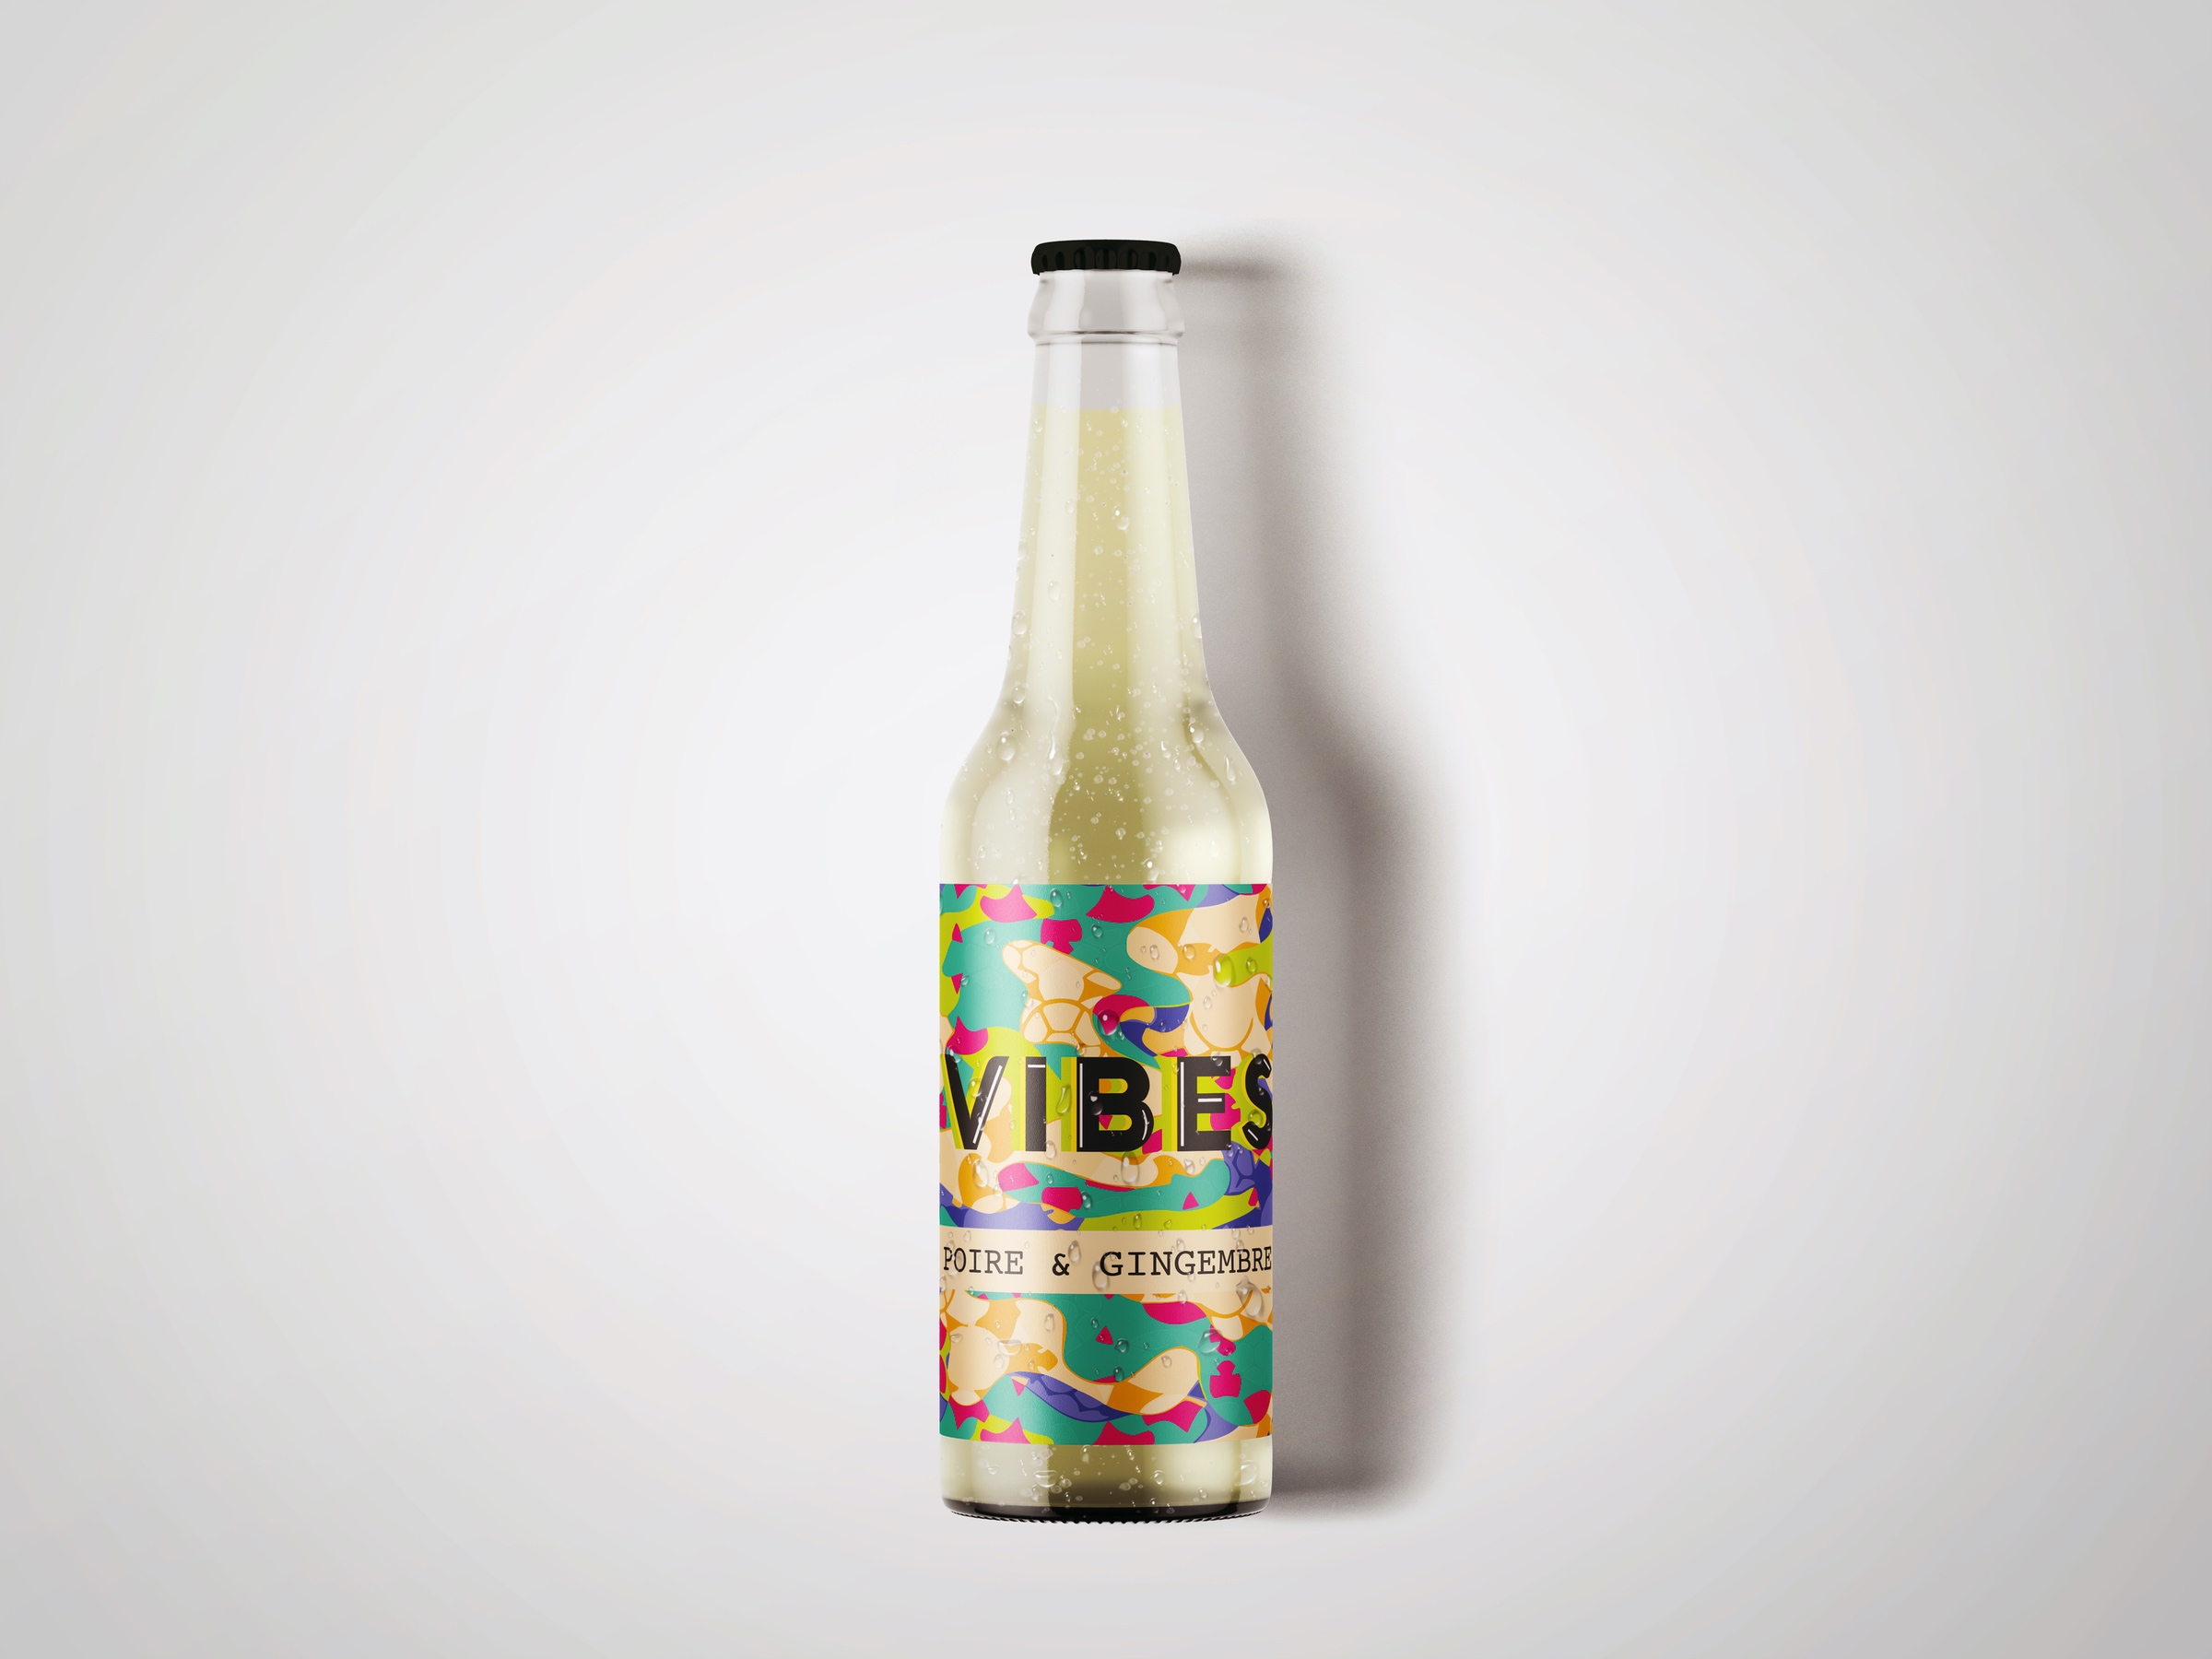 VIBES - Poire & Gingembre - VIBES